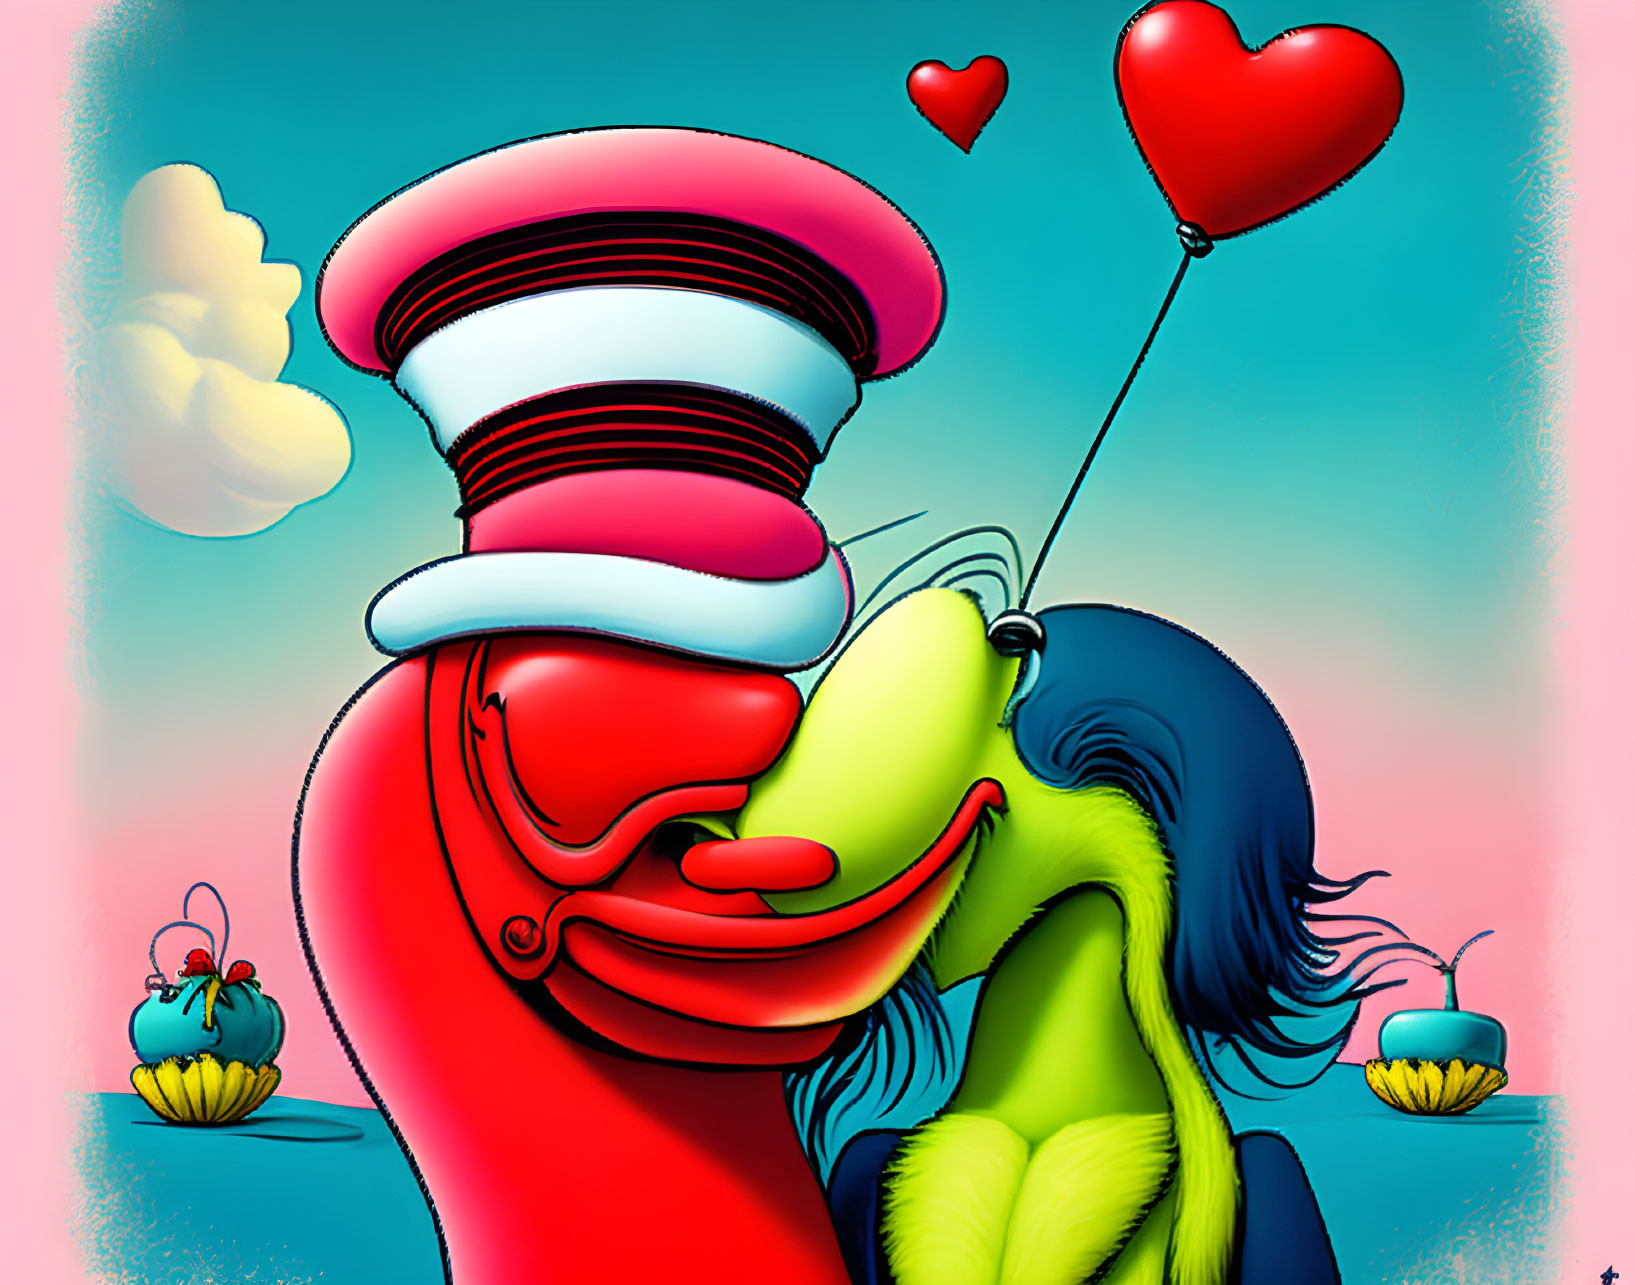 Cartoon characters kissing under blue sky with heart balloon and cupcakes